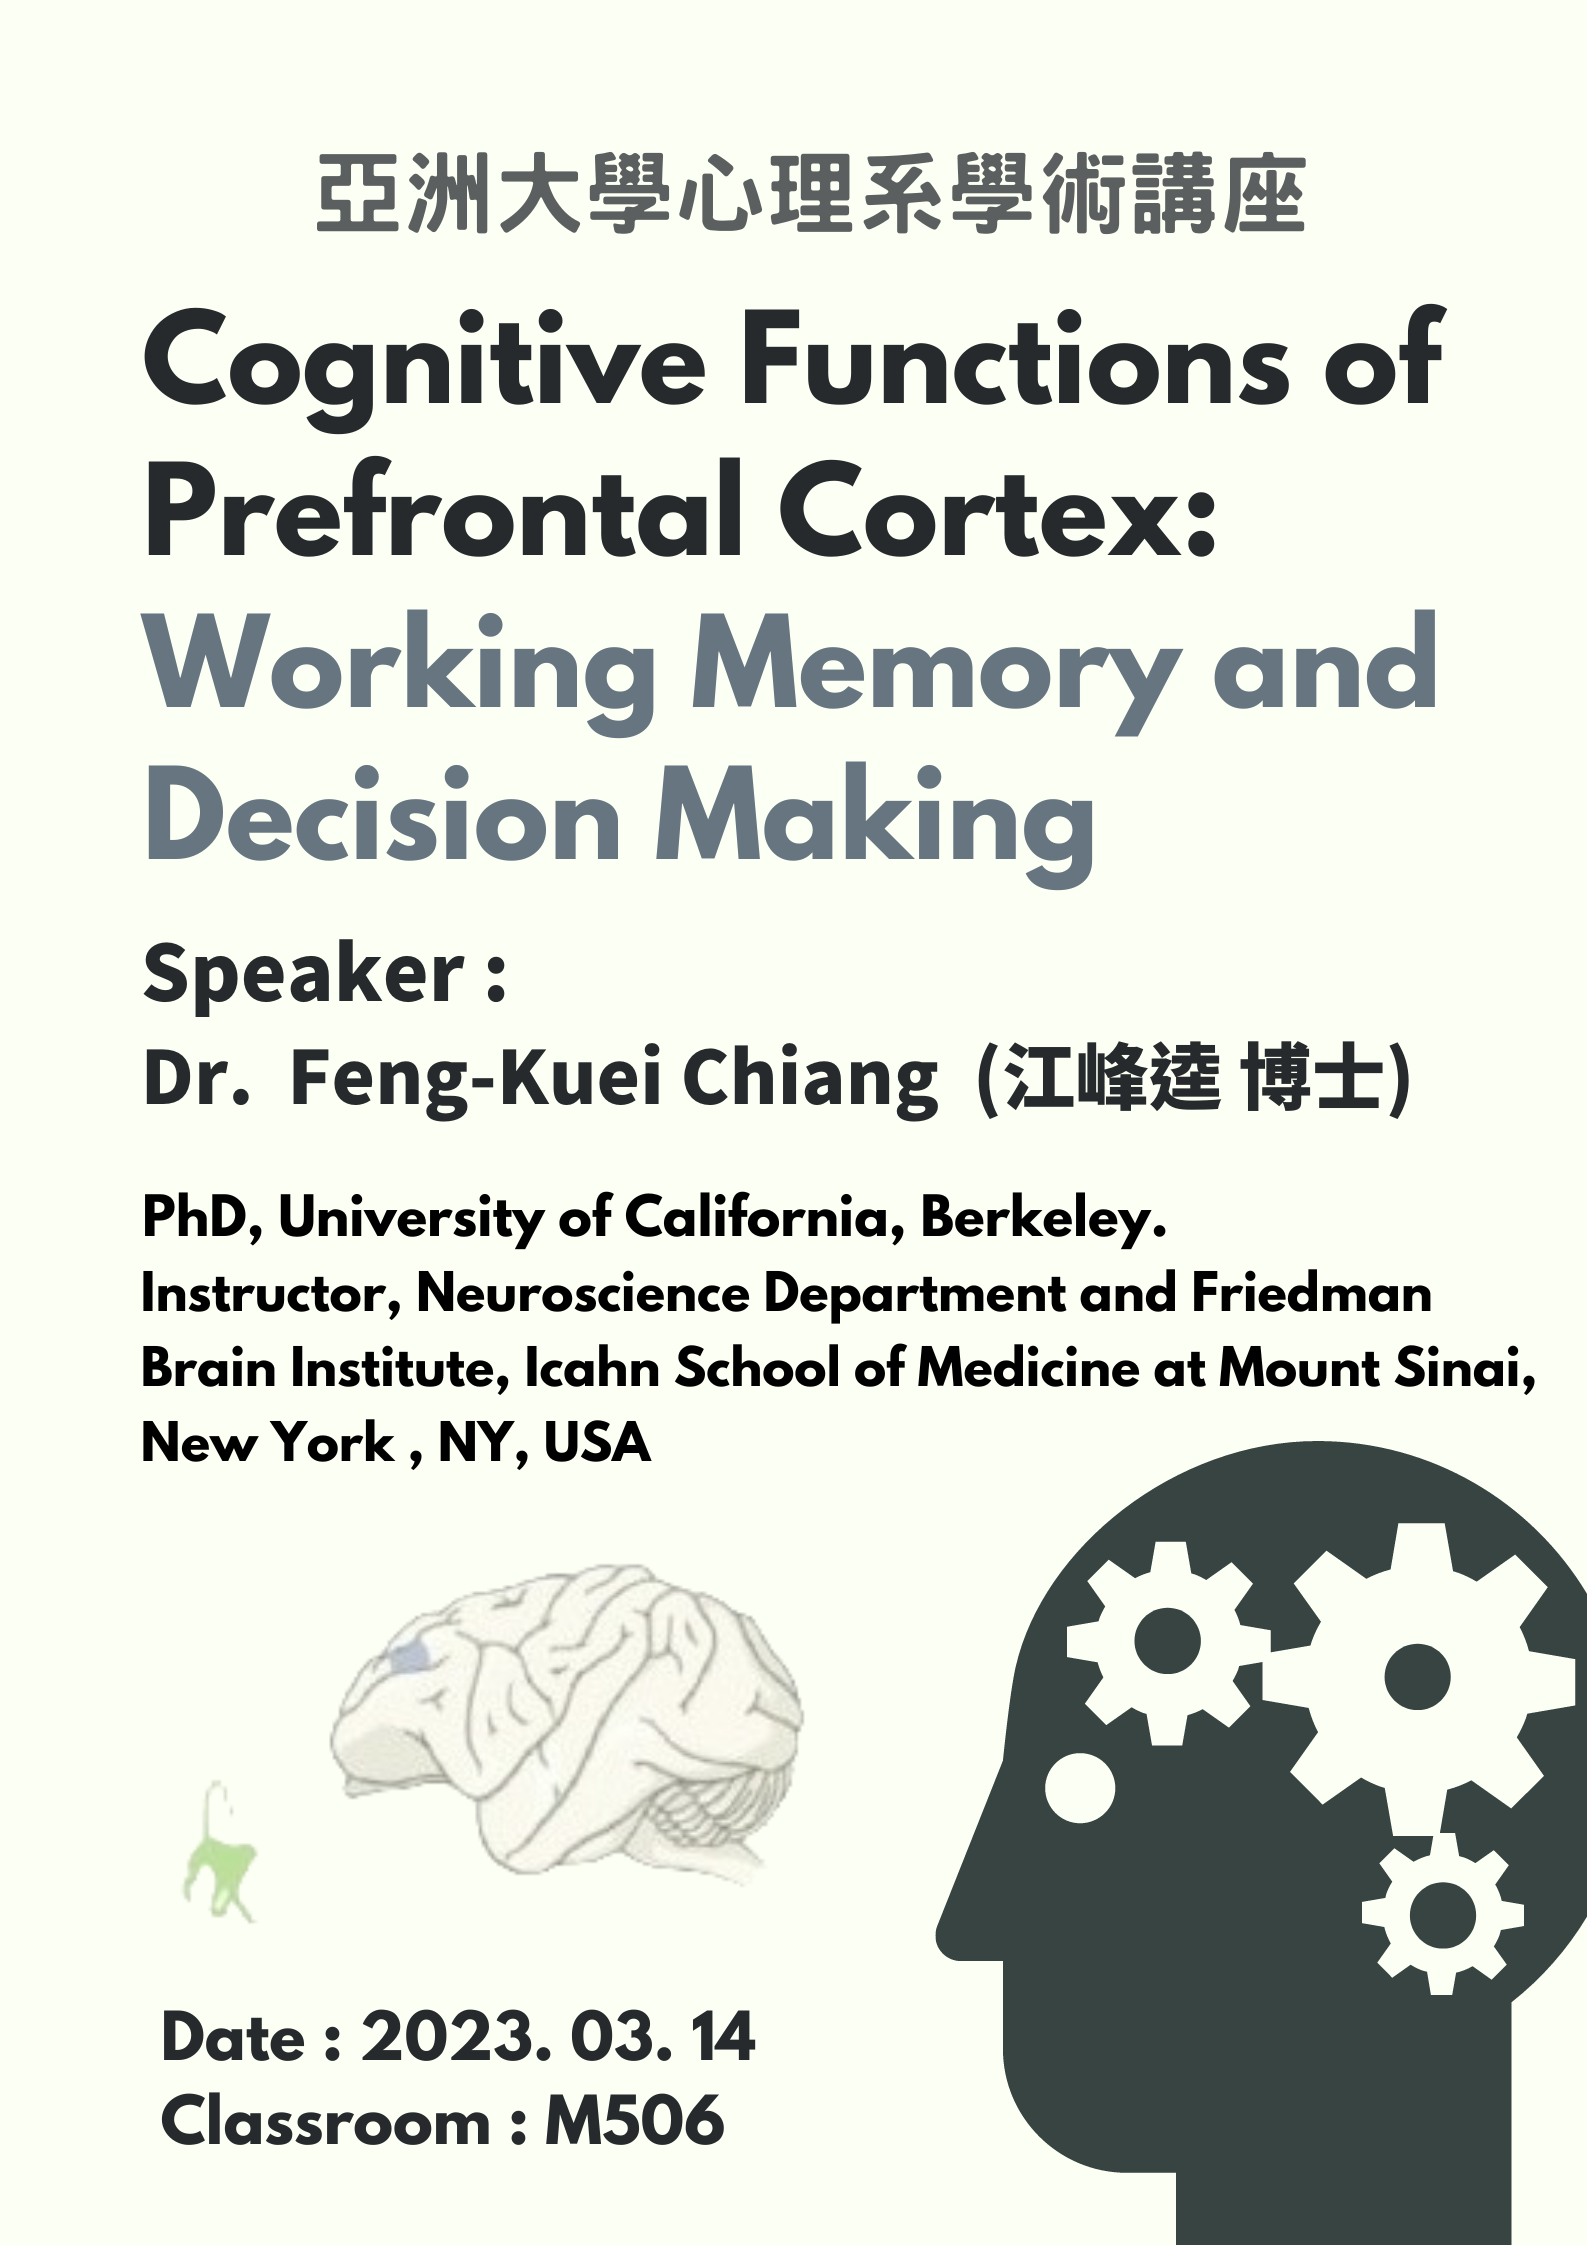 Cognitive functions of prefrontal cortex working memory and decision making